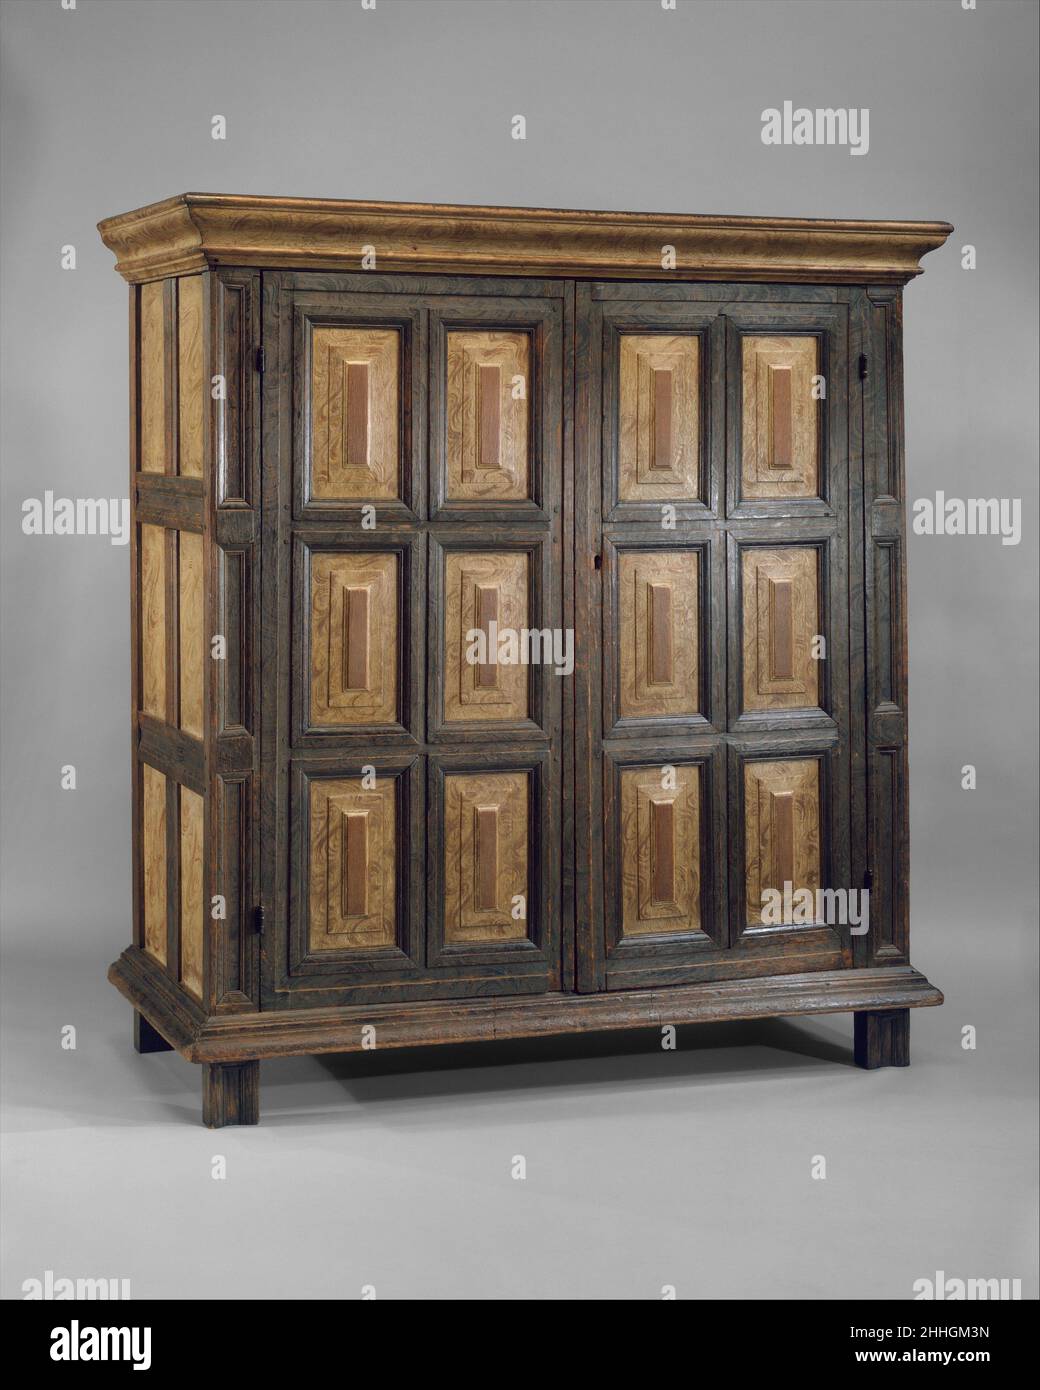 steno restaurant amateur Kast 1650–1700 American A kast is a distinctive type of cupboard that was  made in the New York—New Jersey area settled by the Dutch. Strongly  architectural in design, the kast derived from